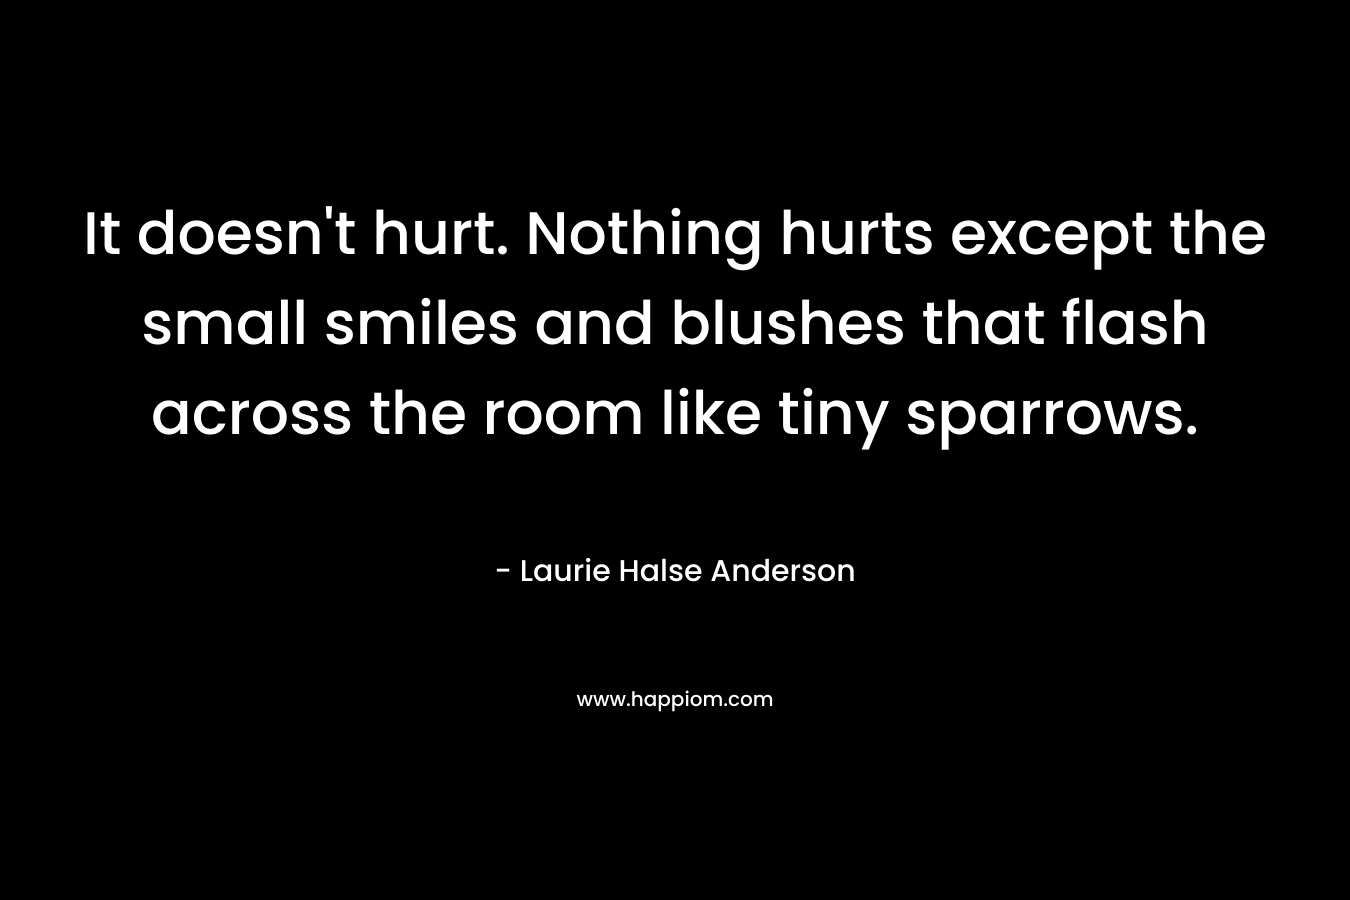 It doesn’t hurt. Nothing hurts except the small smiles and blushes that flash across the room like tiny sparrows. – Laurie Halse Anderson